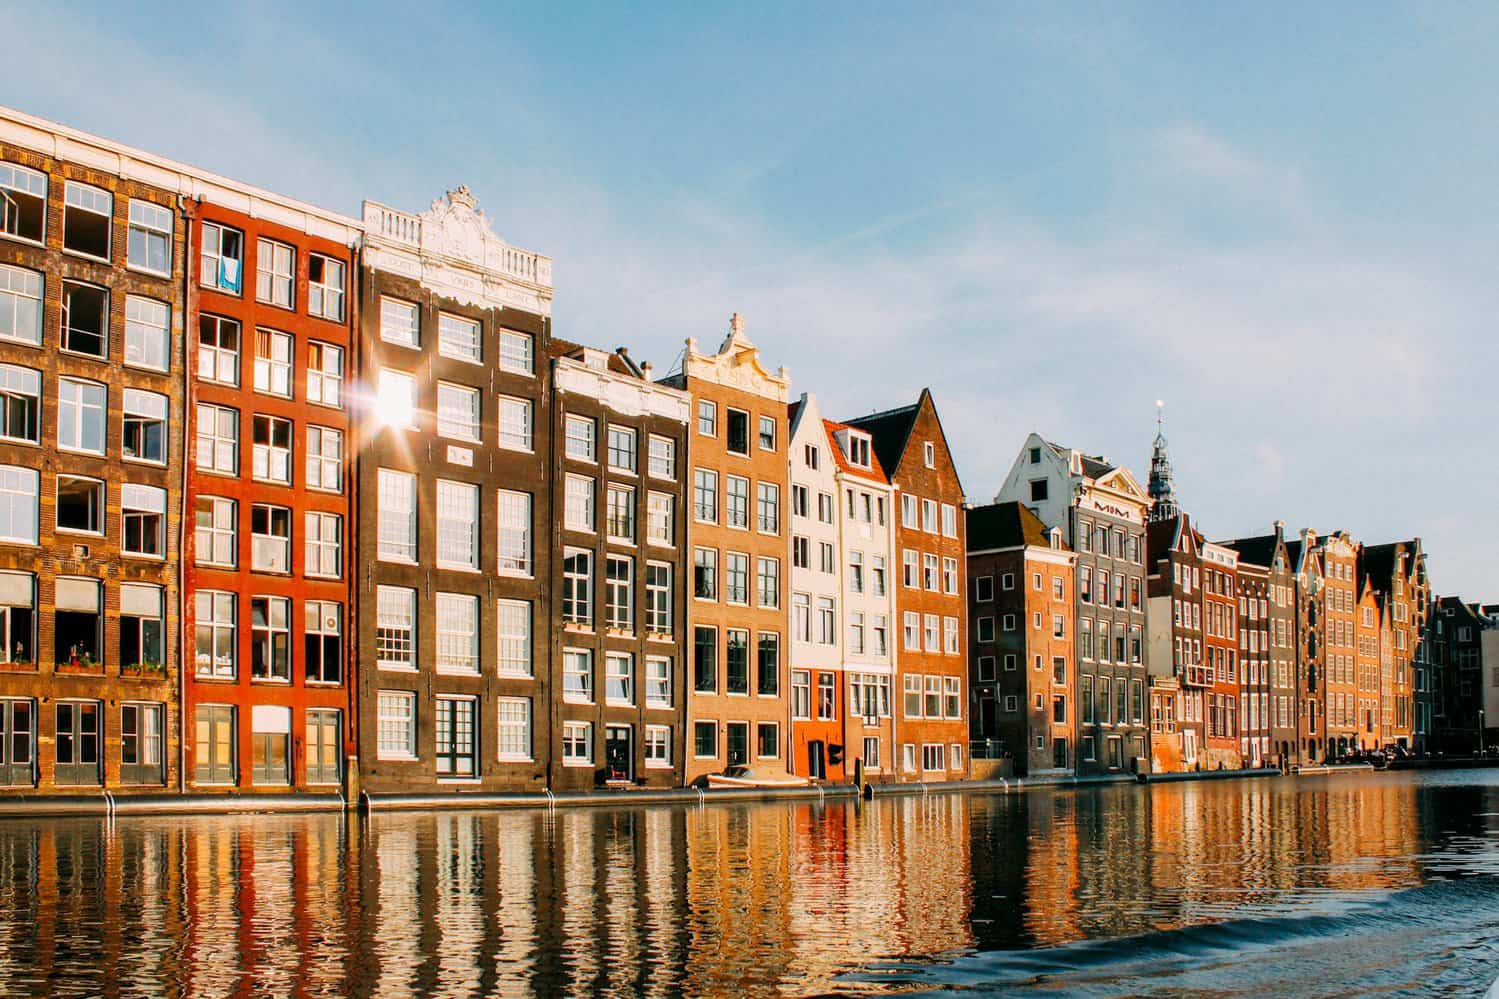 Universities in Amsterdam: Where to Study in the Dutch Capital